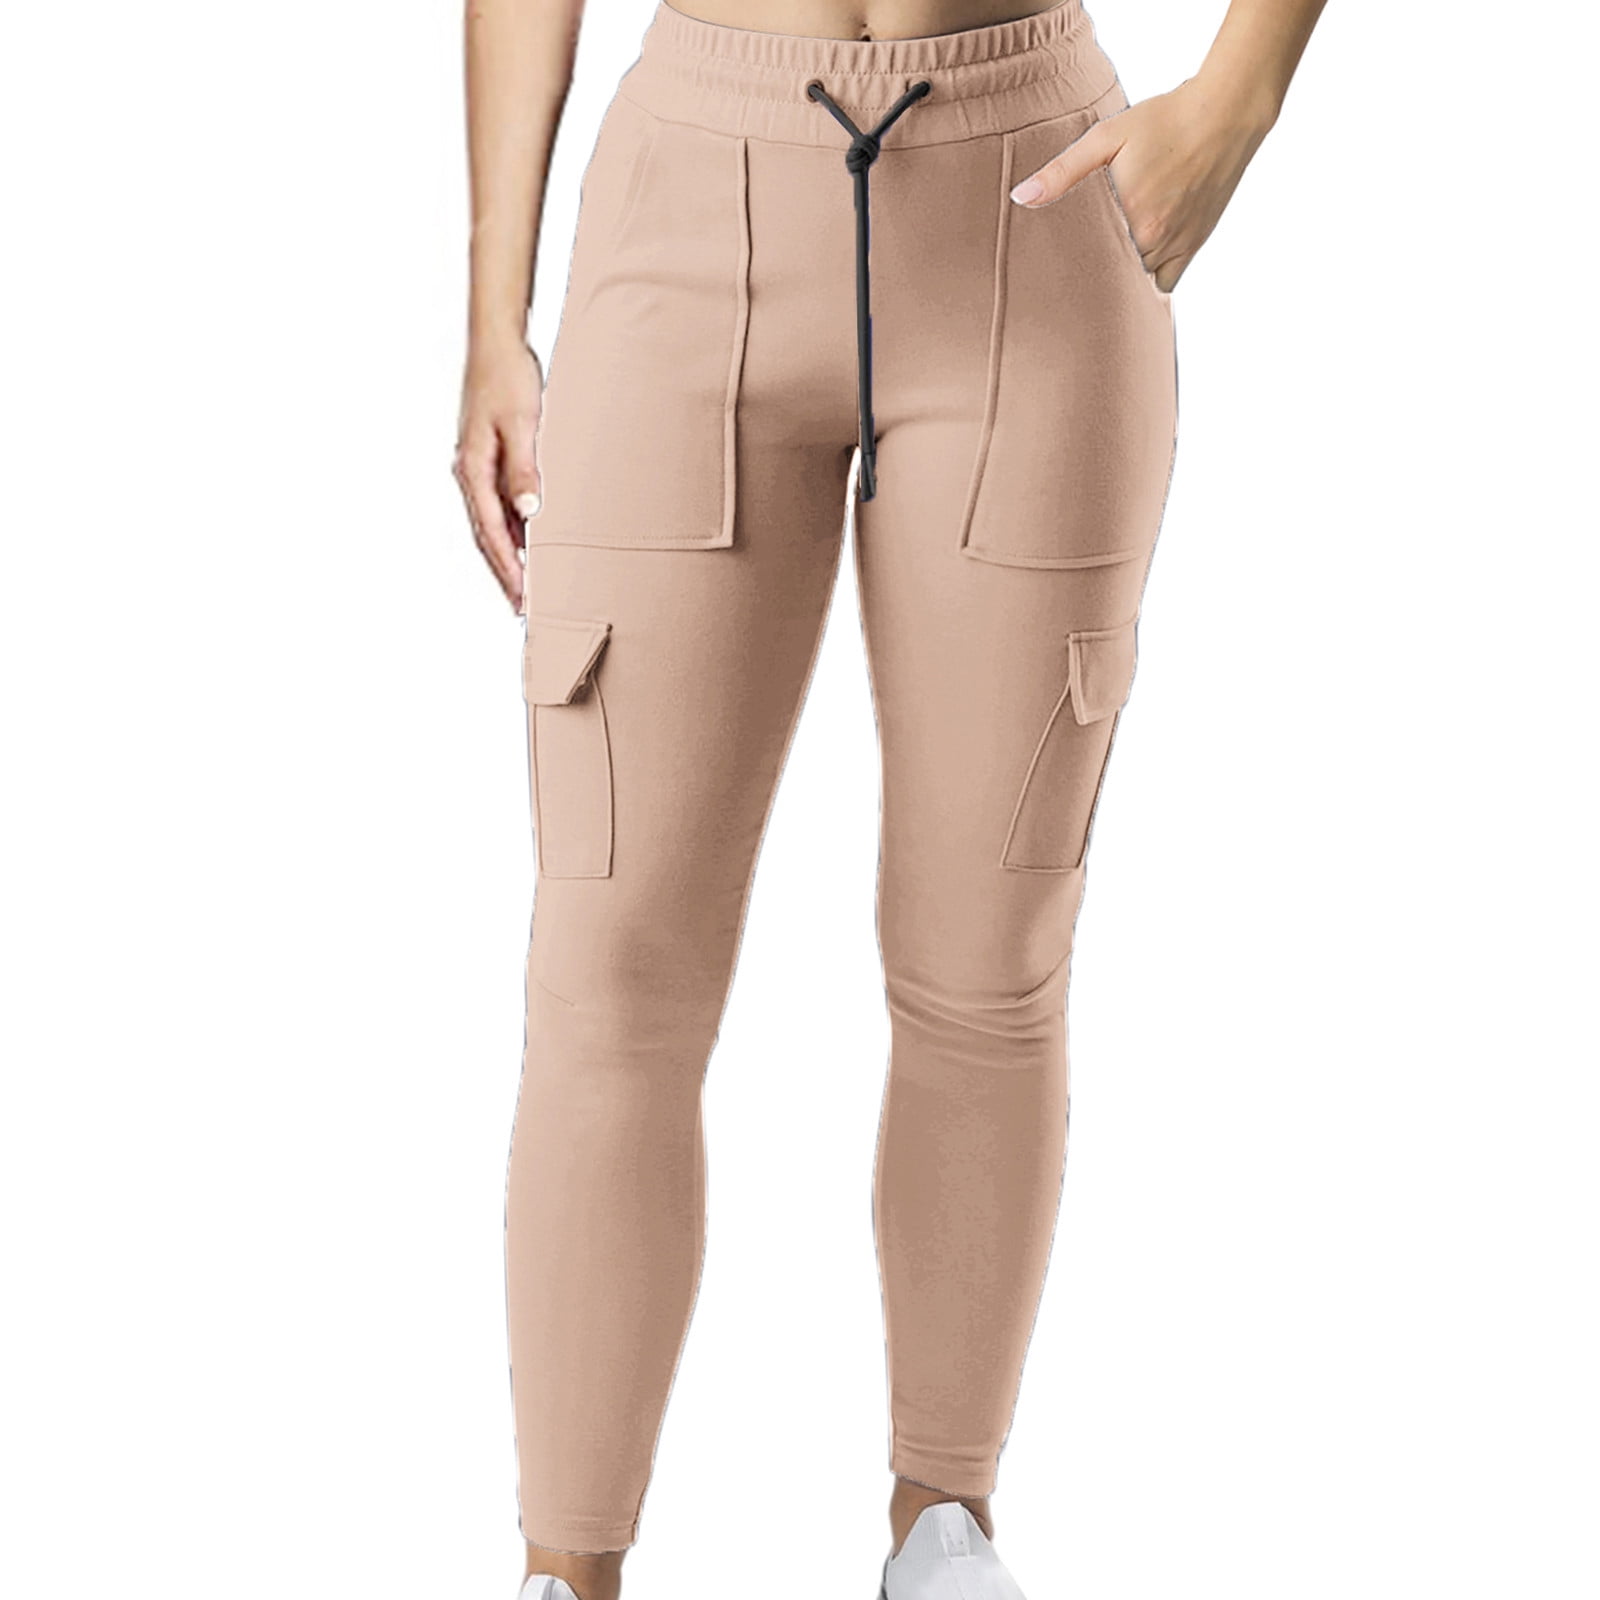 HAPIMO Women's Skinny Cargo Pants with Pocket Summer Discount Sale  Breathable Solid High Elastic Waist Trousers for Girls Stretch Fit Fashion  Beige L